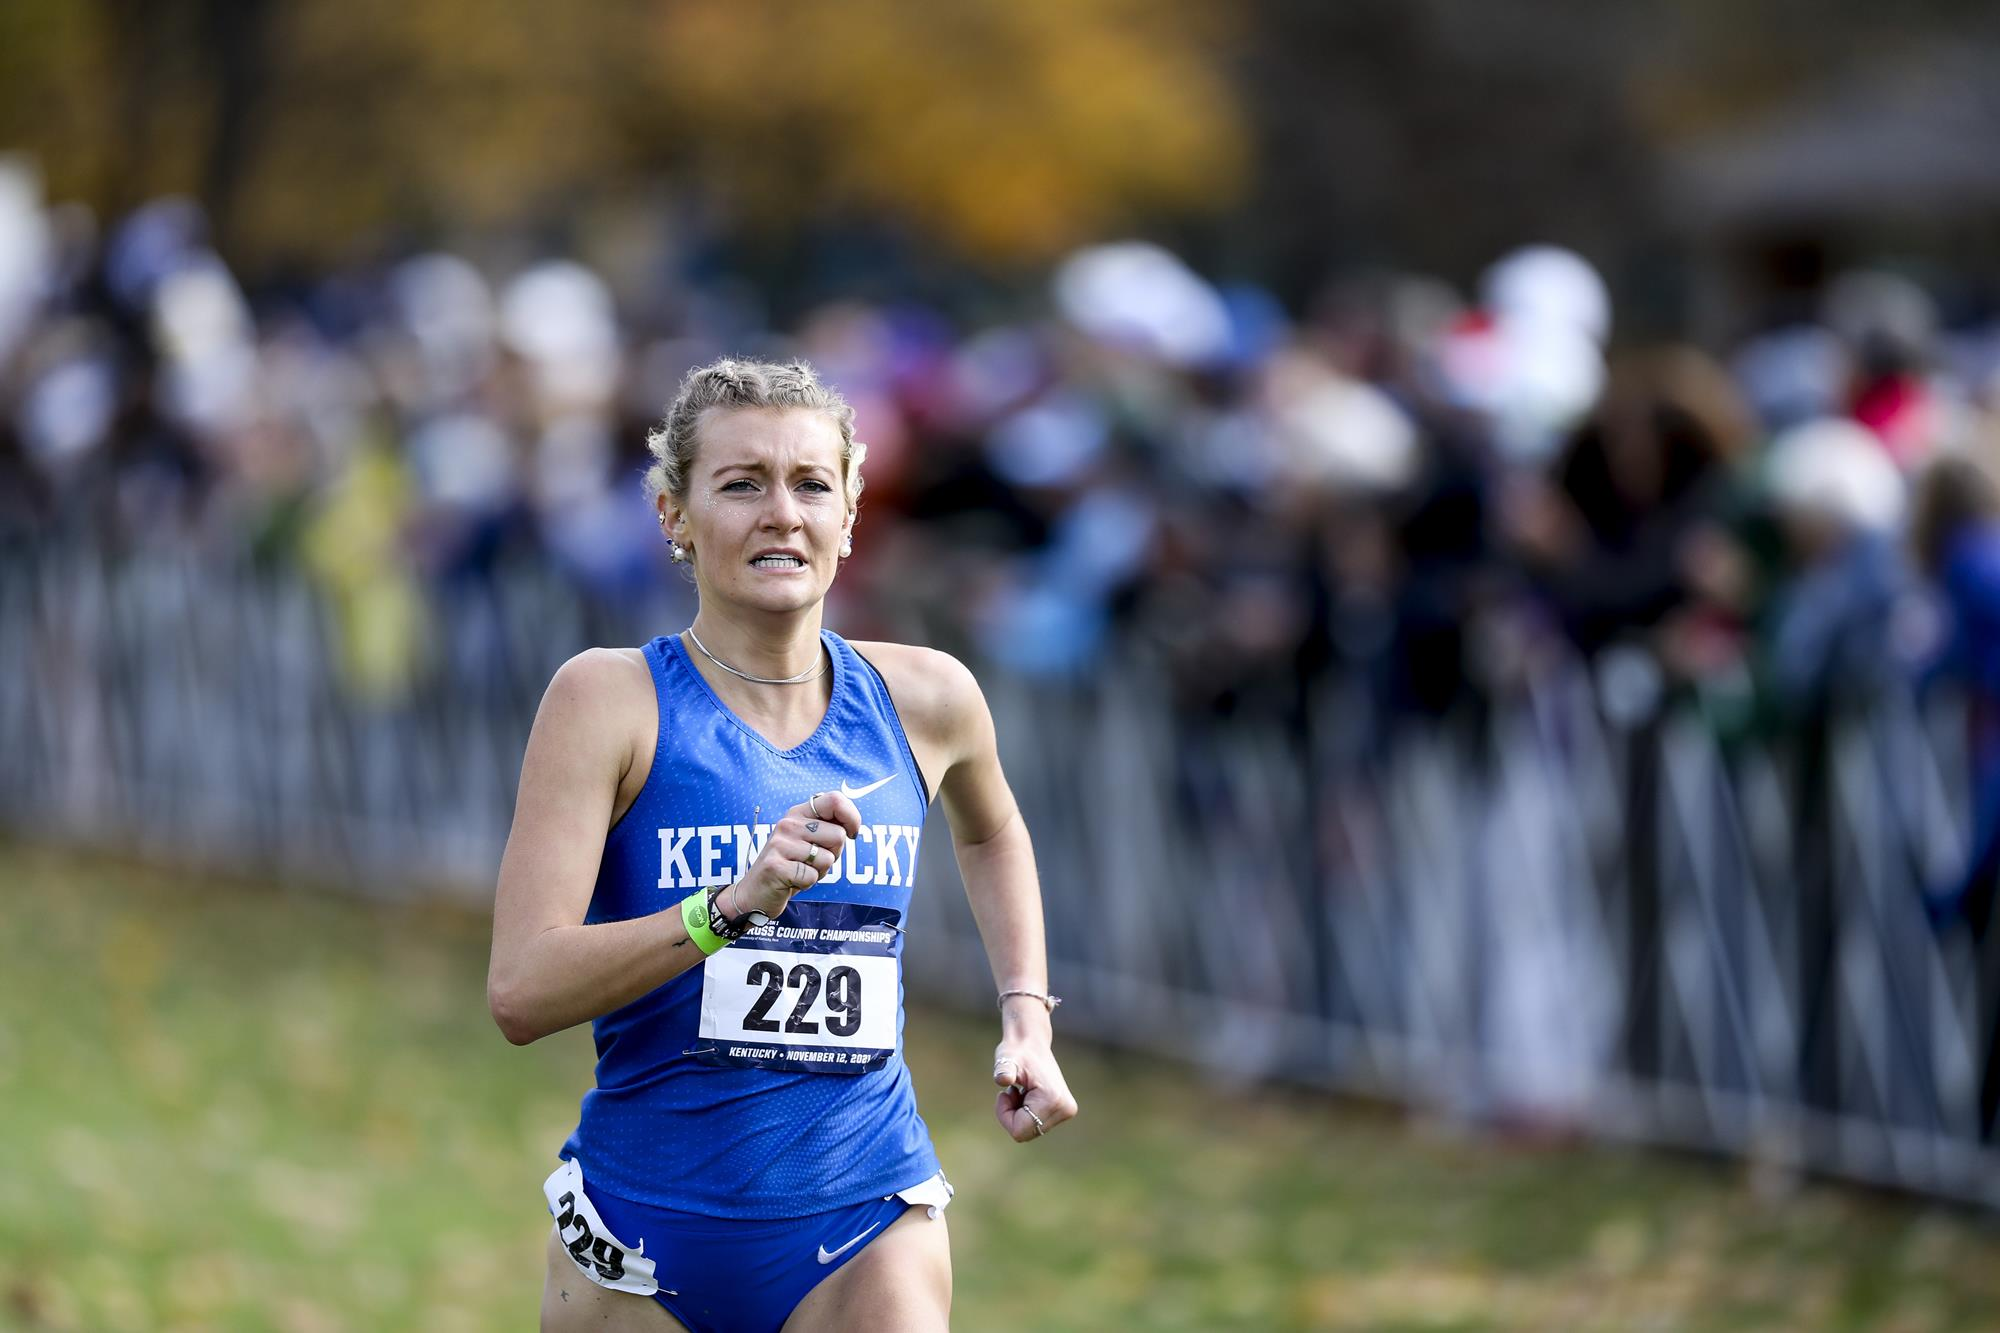 Perri Bockrath Qualifies for NCAA Cross Country Championships